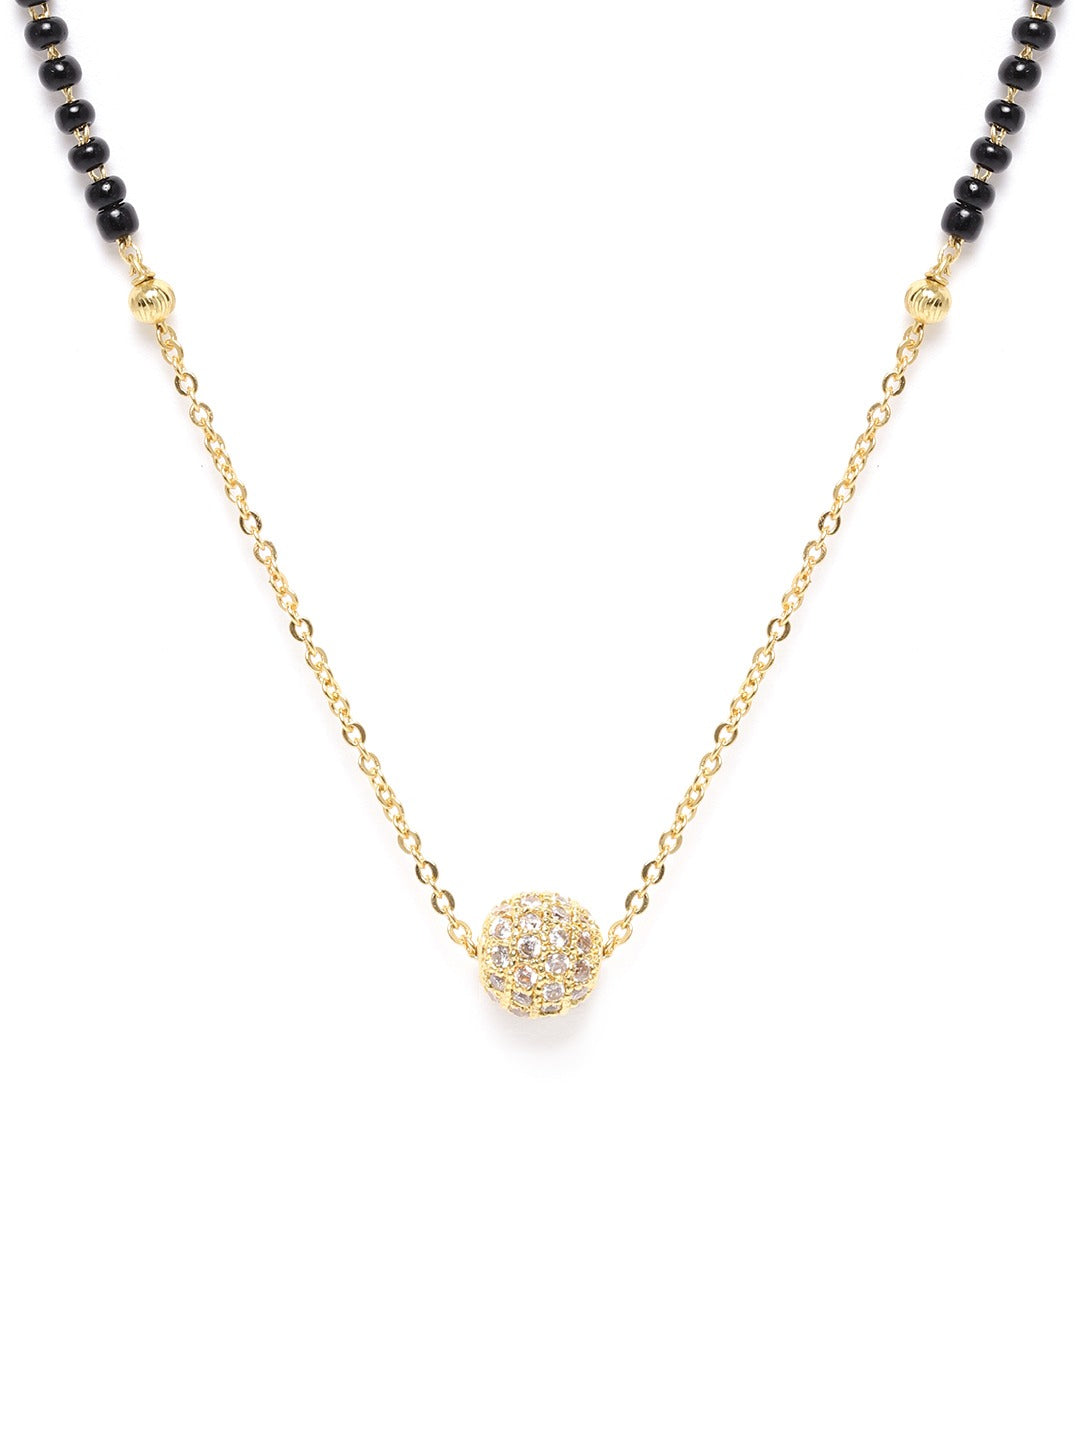 Black Gold-Plated AD-Studded & Beaded Mangalsutra